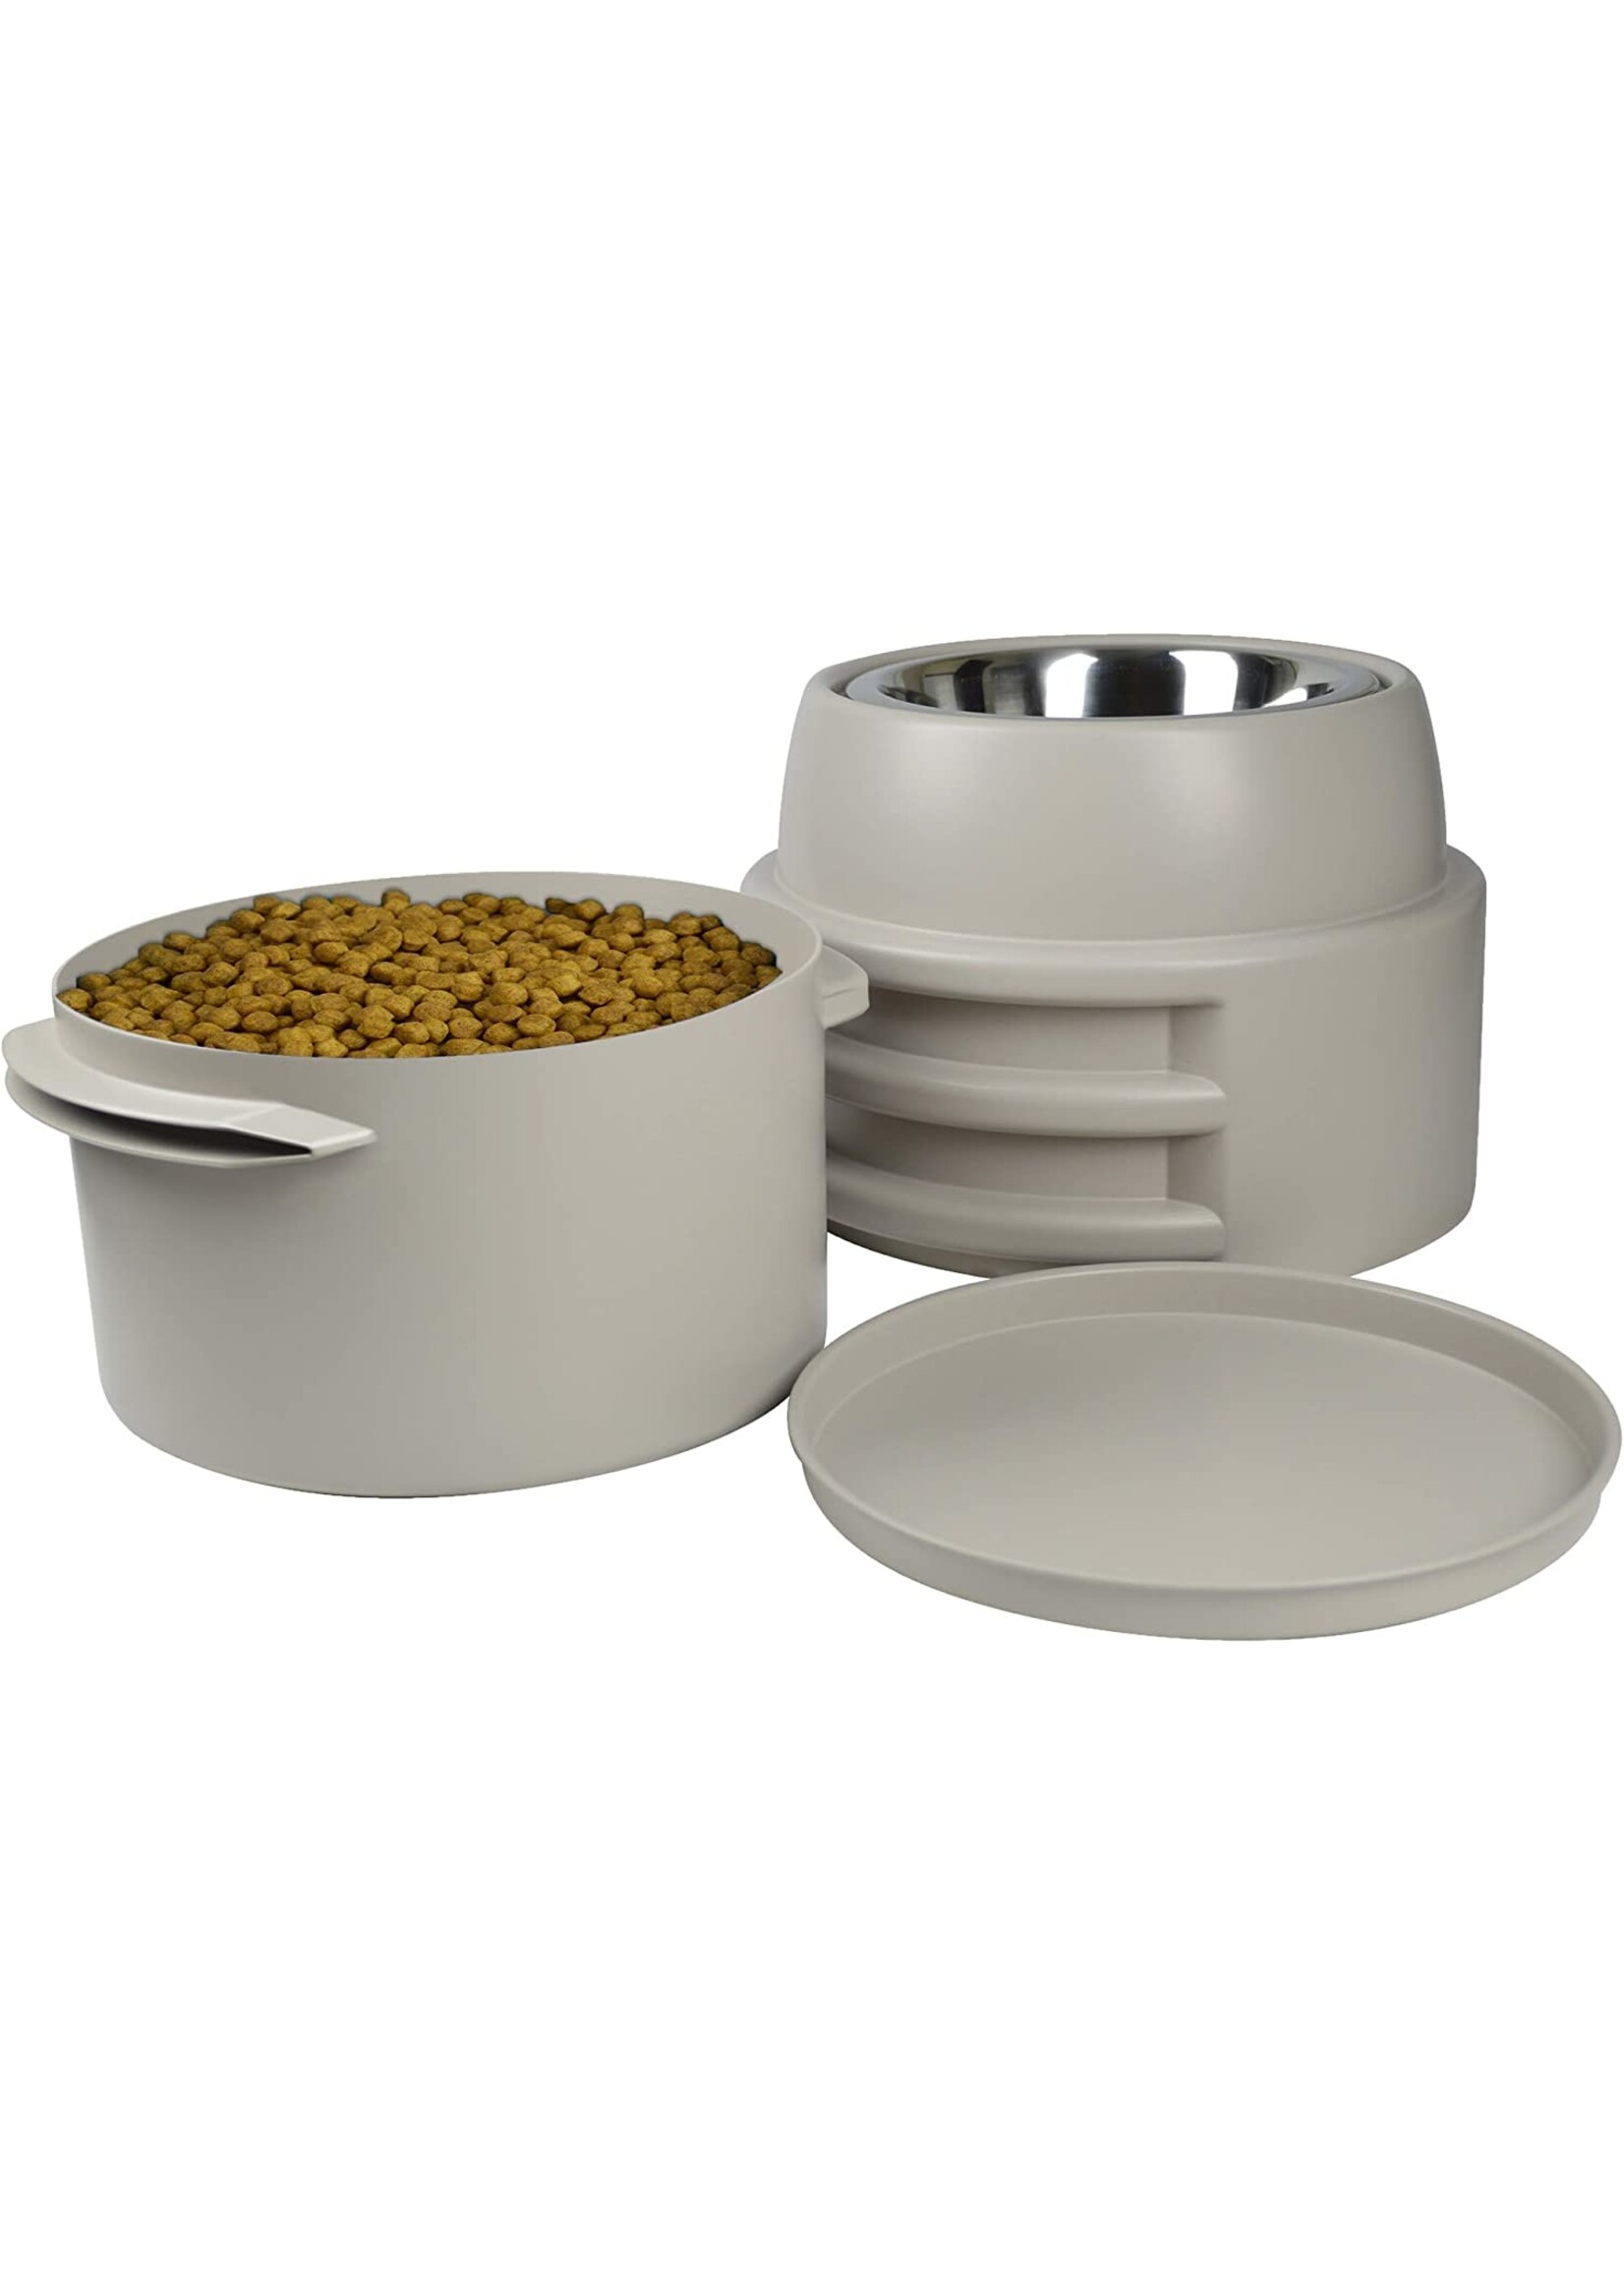 Our Pets Our Pets Store-N-Feed Single Adjustable